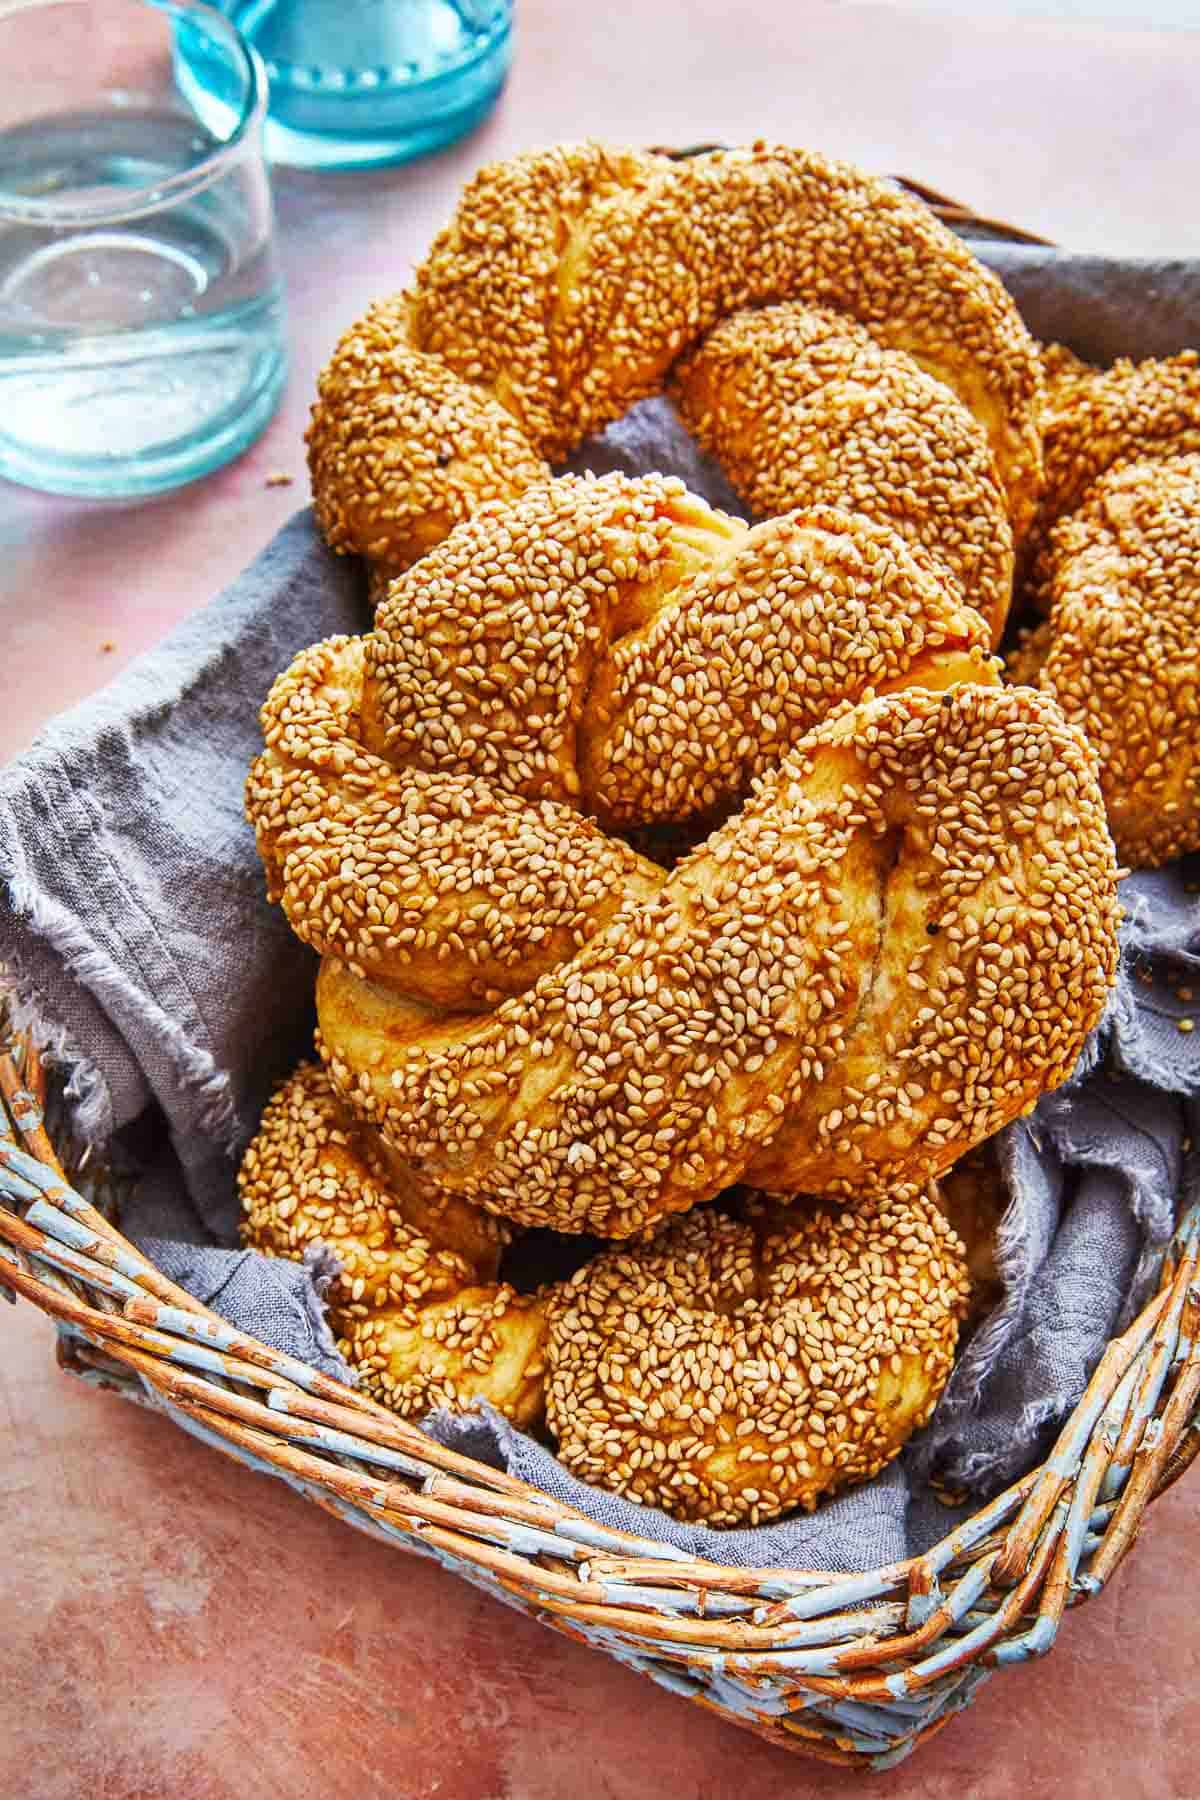 baked simit dough rings in a basket.